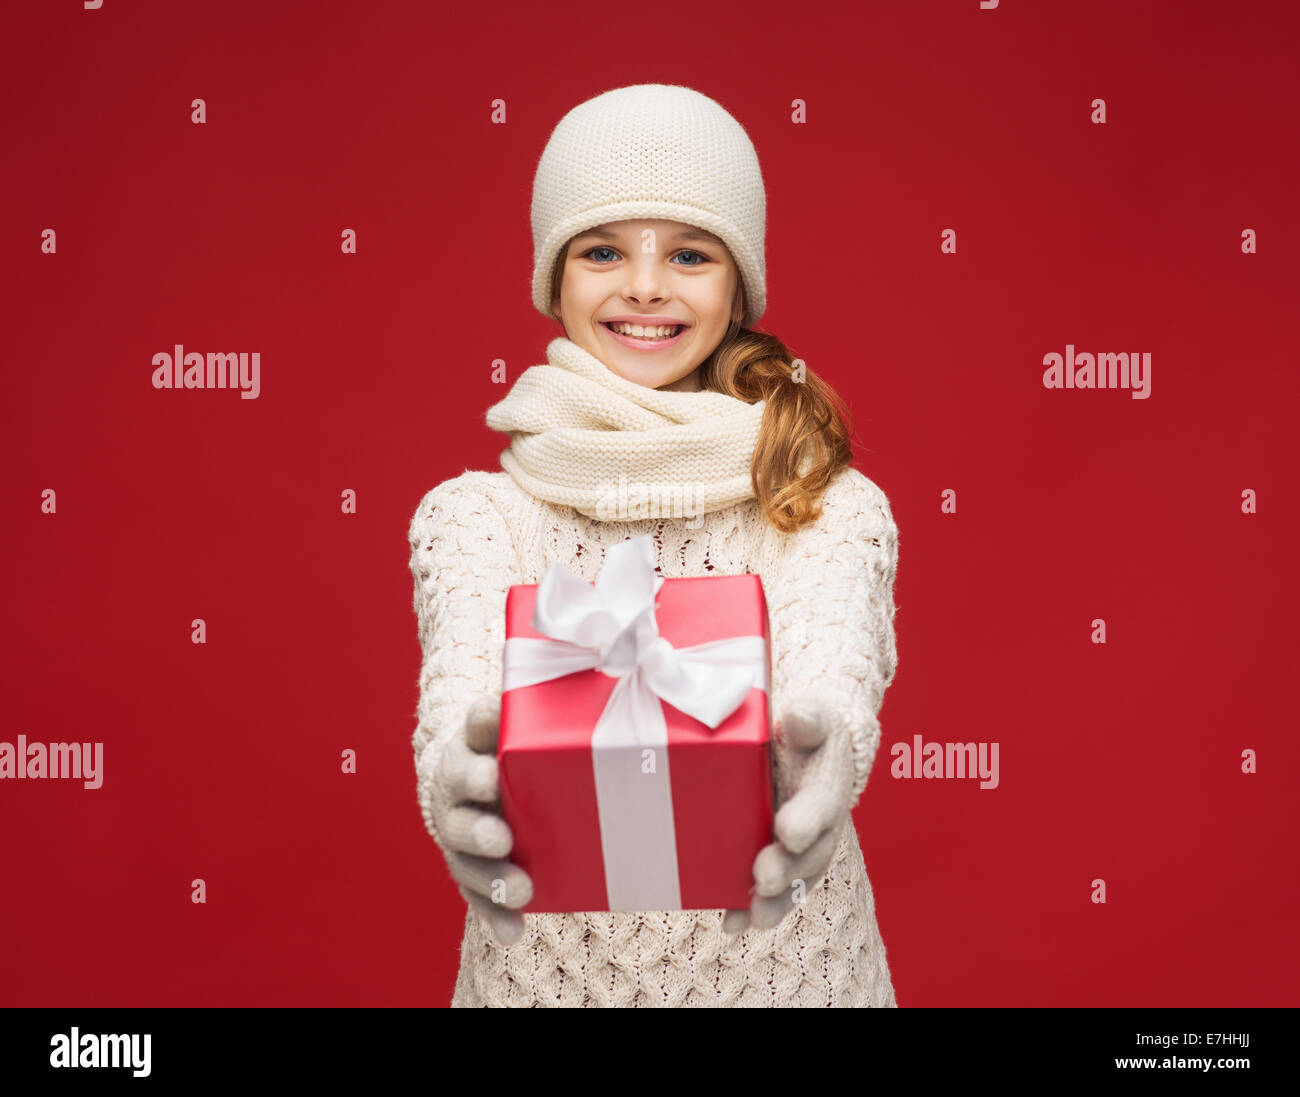 girl in hat, muffler and gloves with gift box Stock Photo